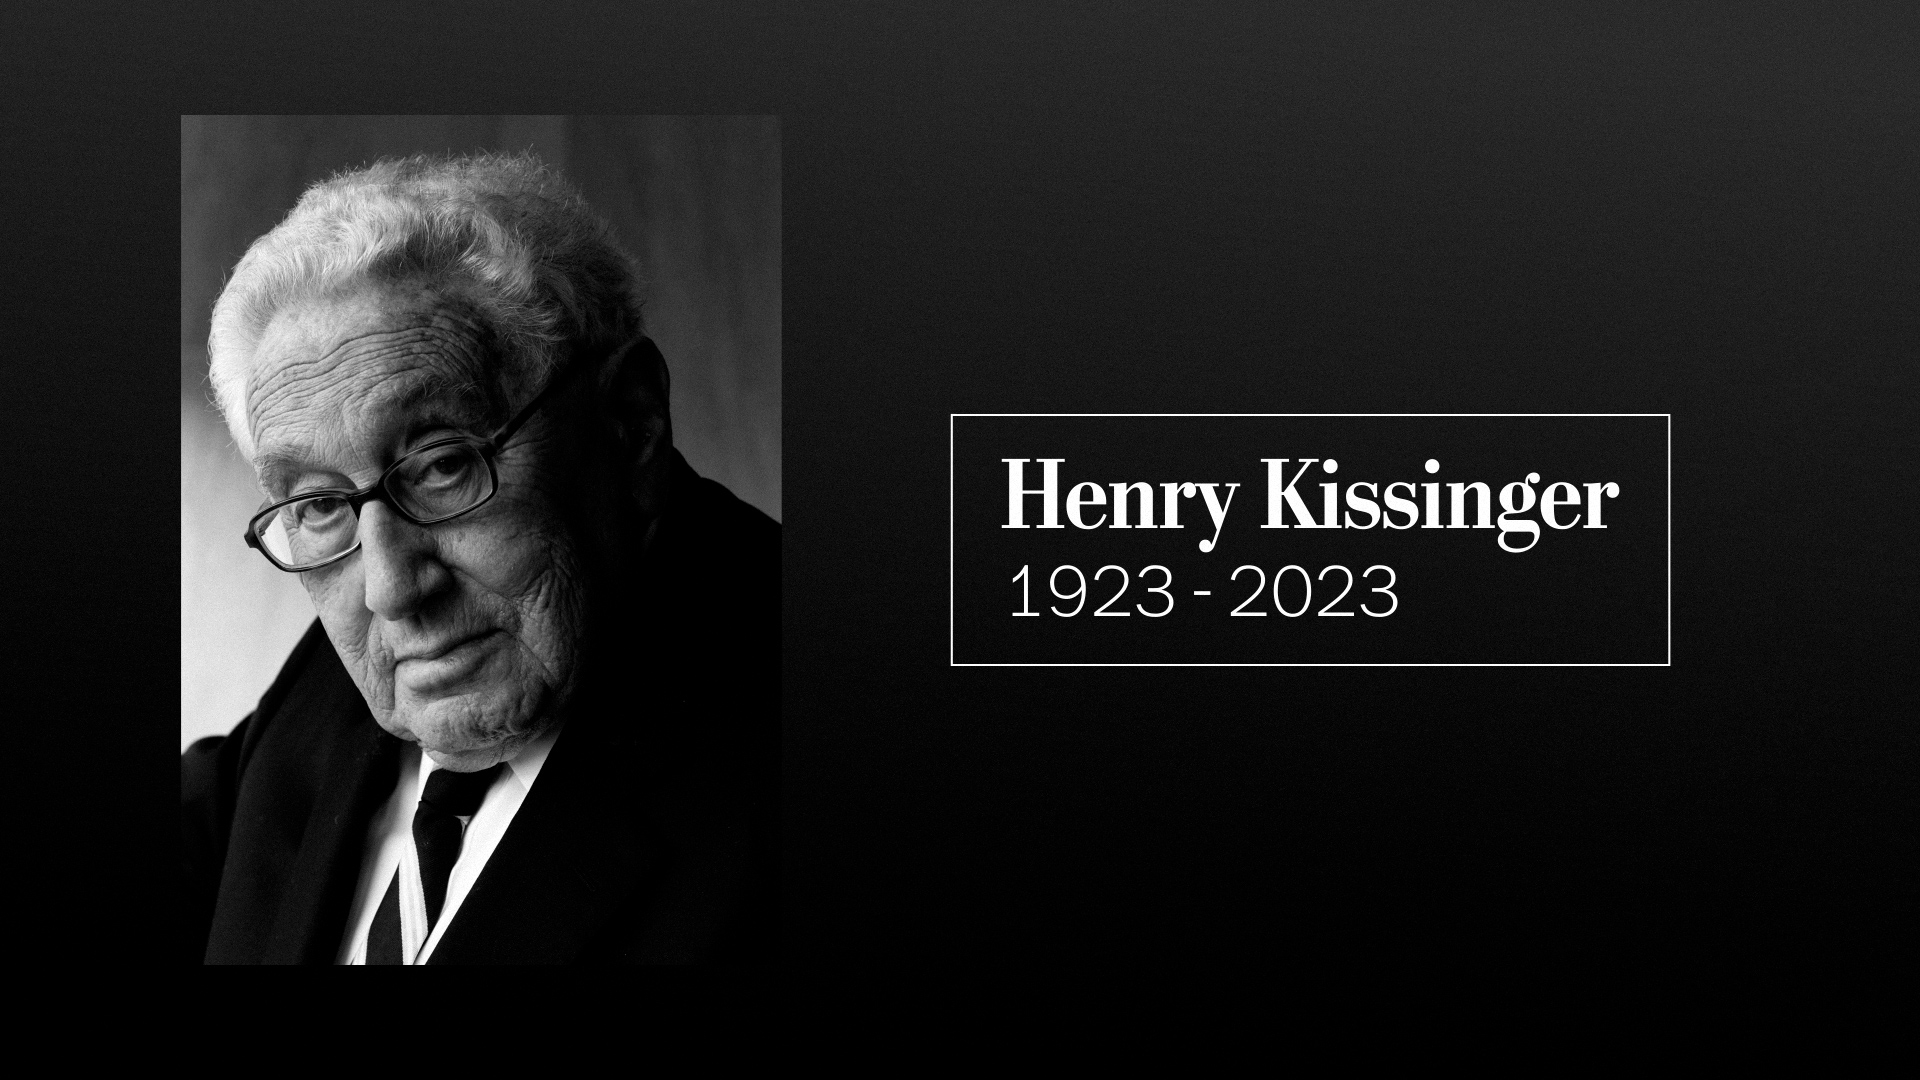 World reacts to Henry Kissinger’s death and legacy in wars